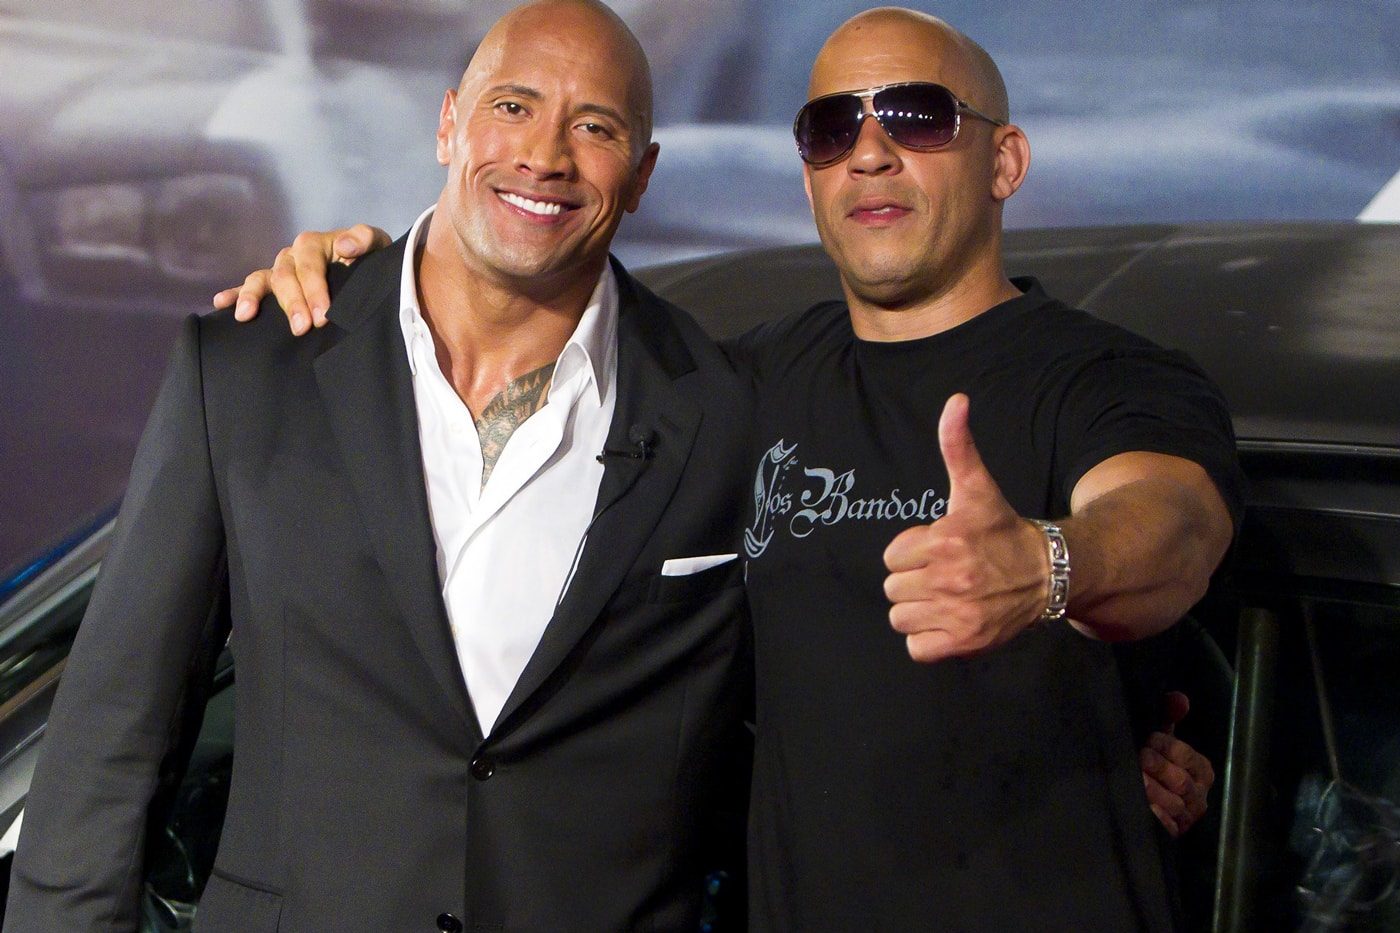 Fast & Furious' Stars Have a No Fight Loss Clause